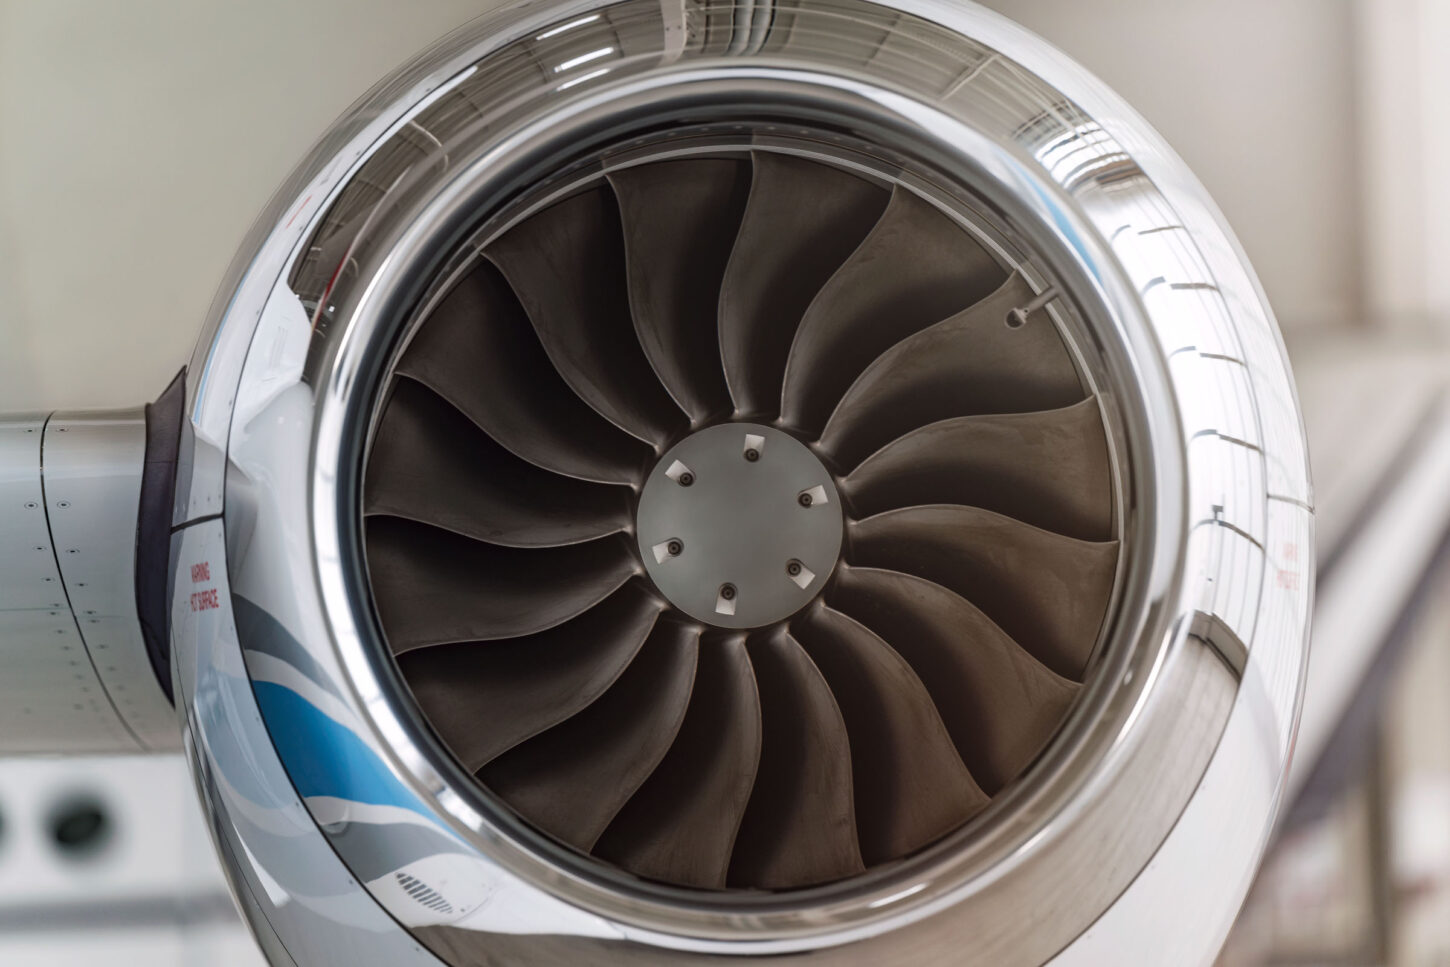 Aircraft turbo engine from the front